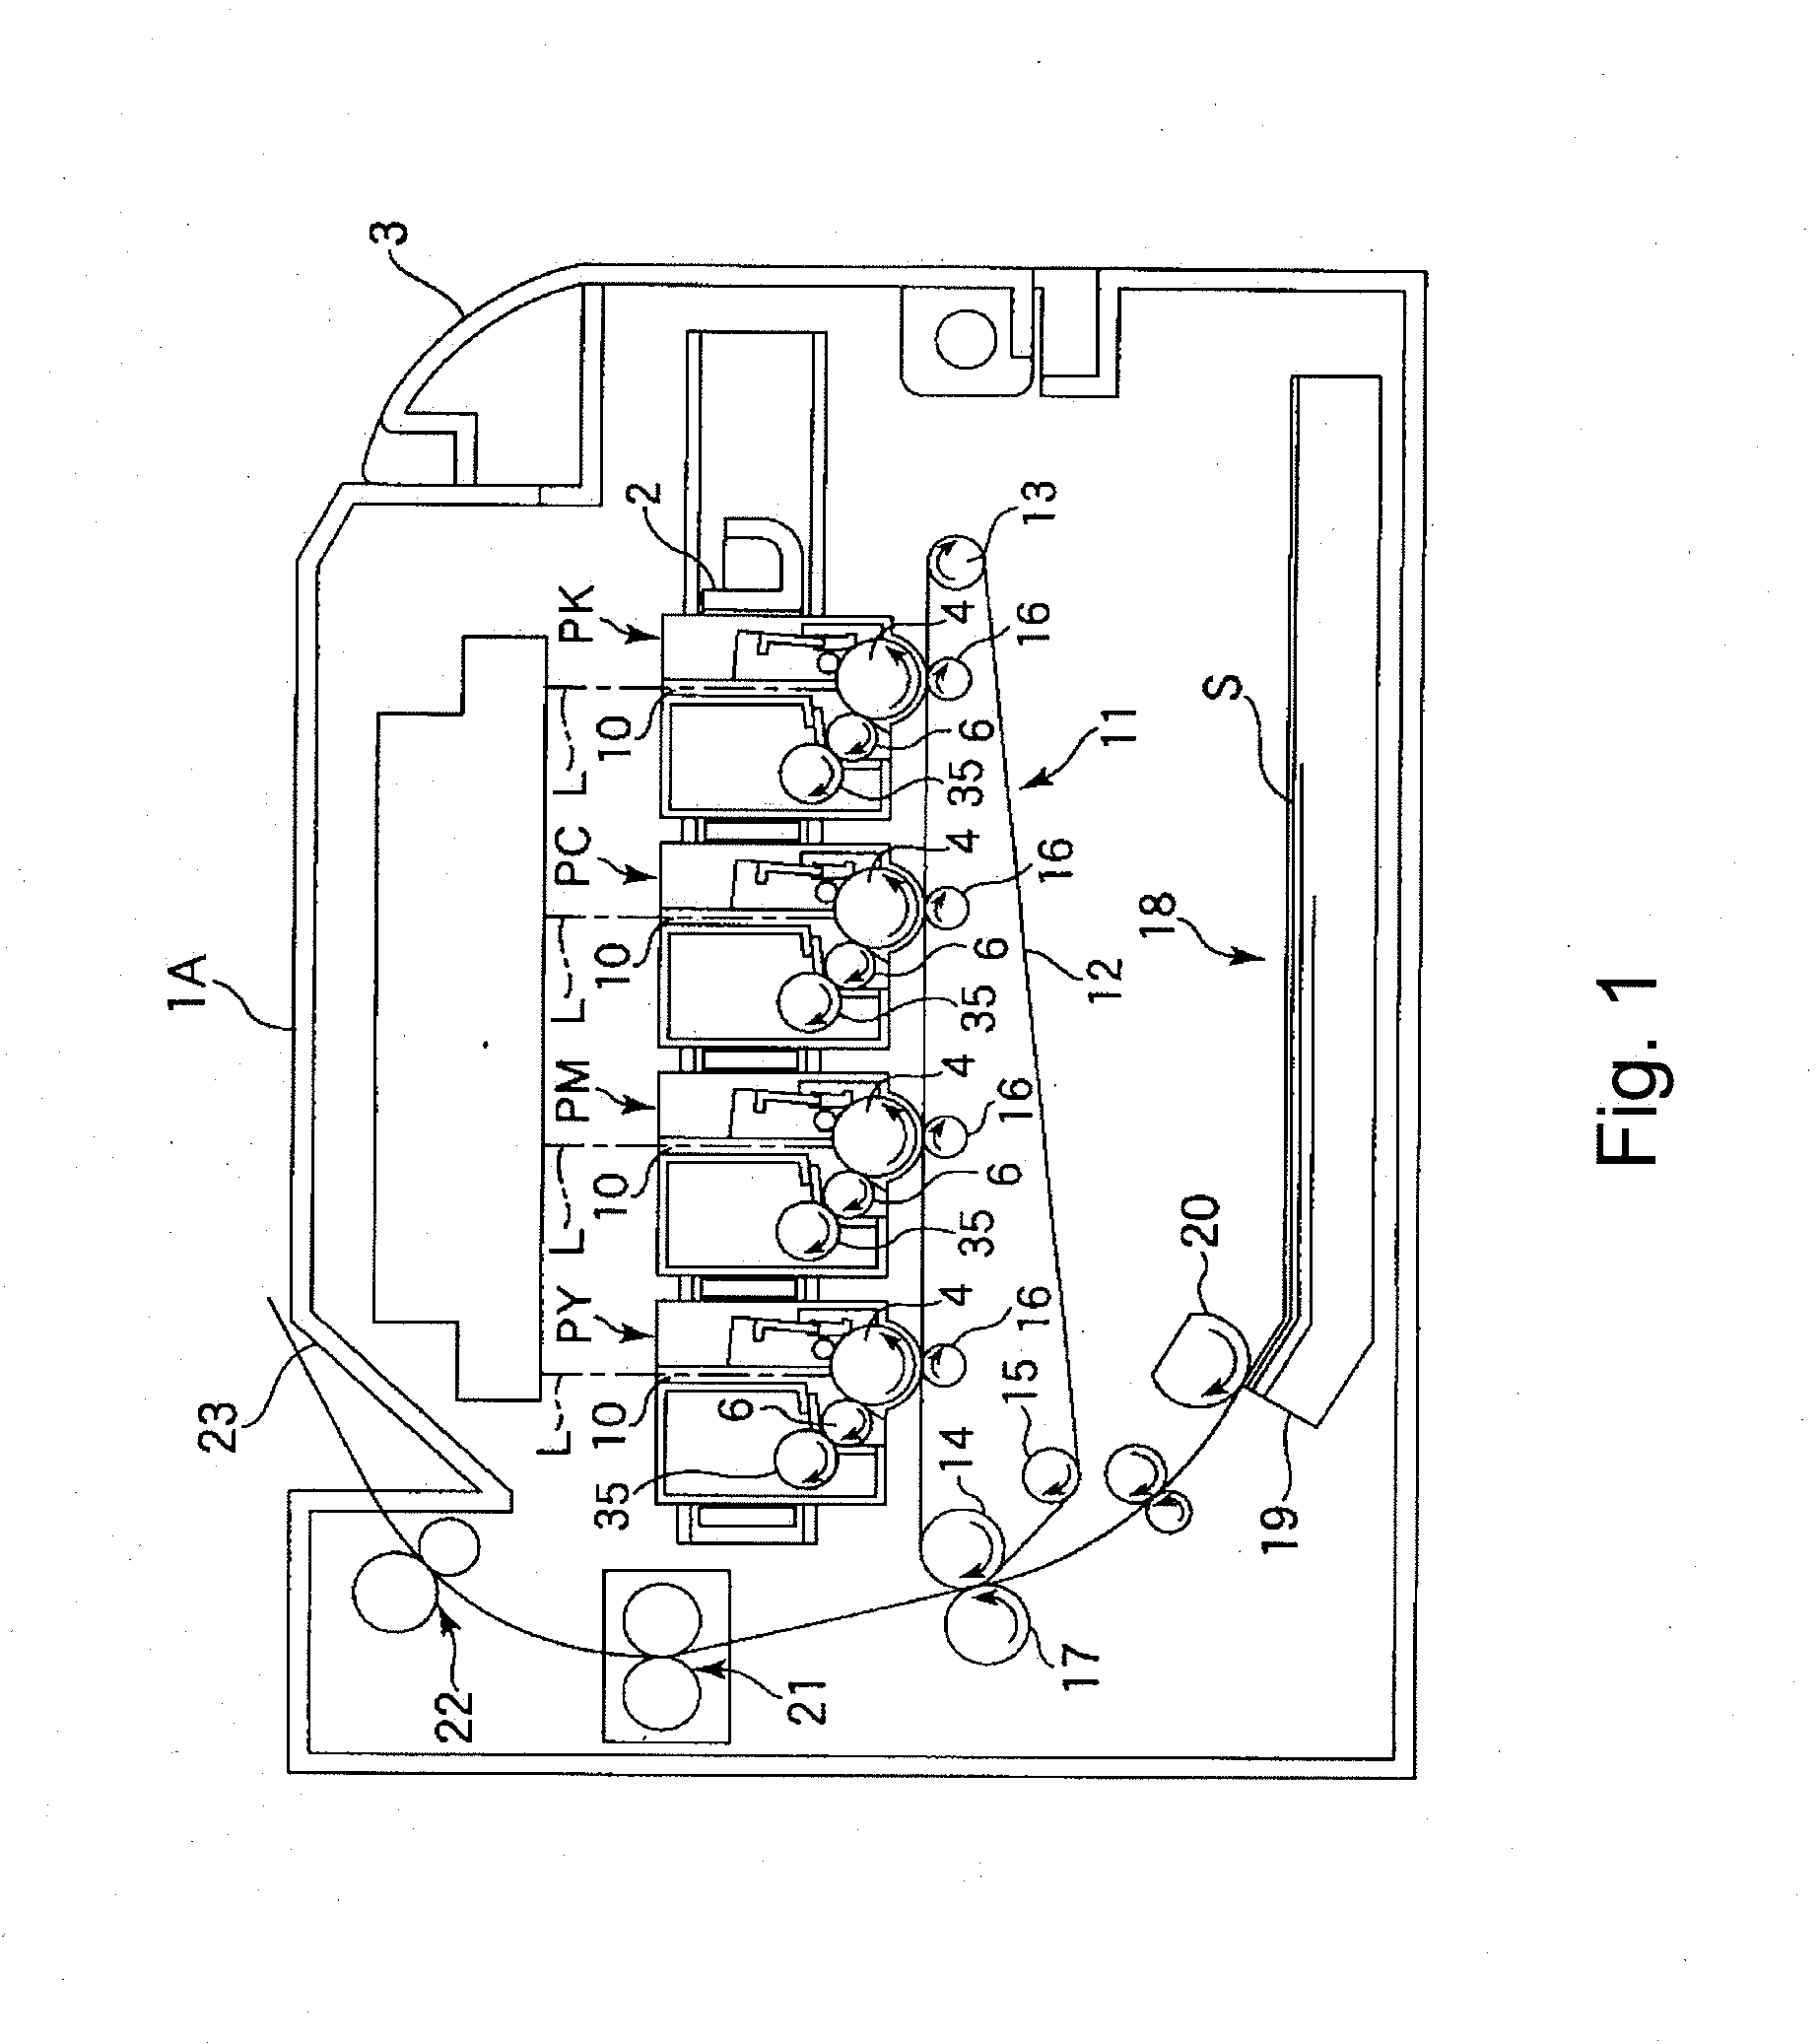 Developing device and process cartridge